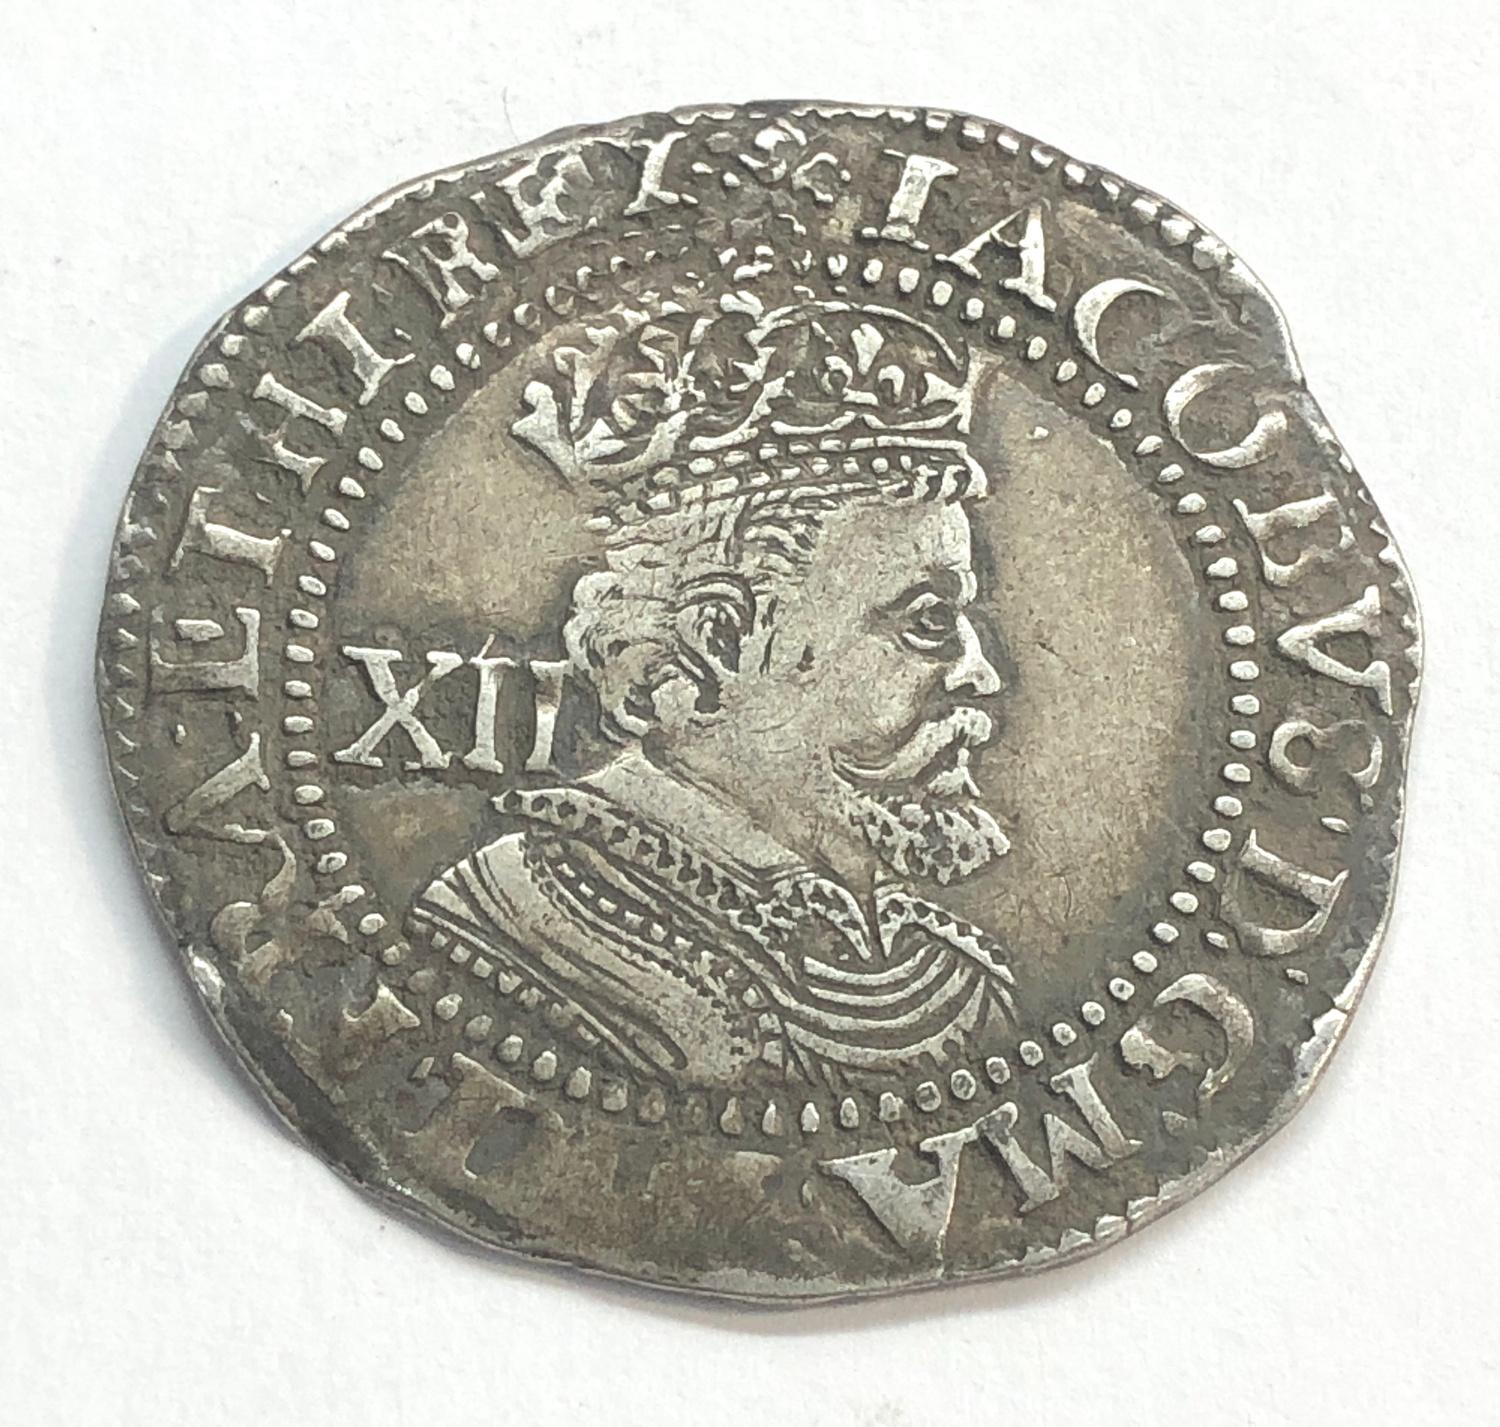 James 1st 1603-25 silver coin measures approx 31mm dia weight 6.0g please see images for grade and